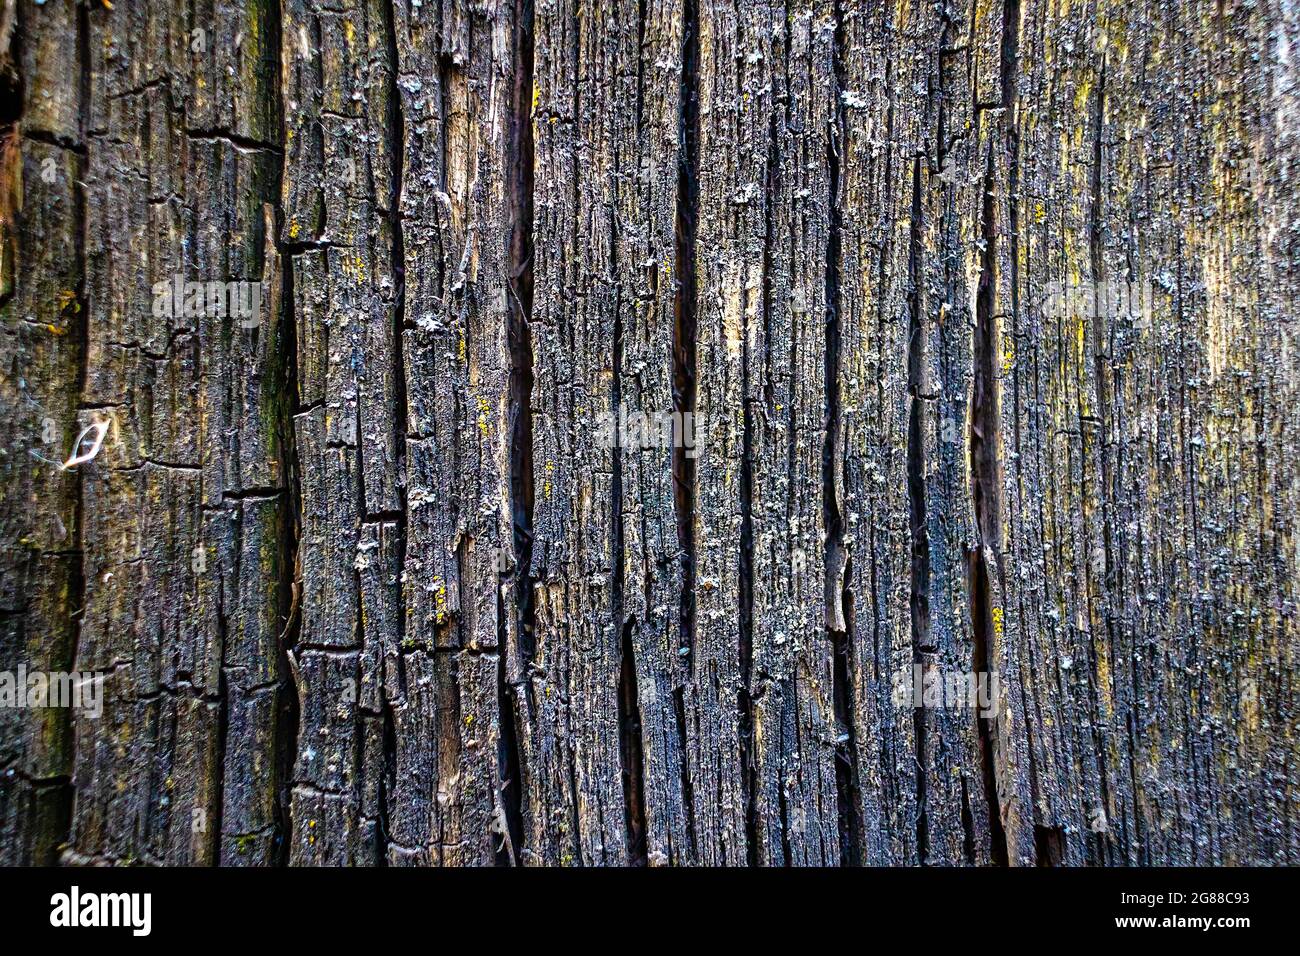 It's the texture of old cracked wood close-up. Wood treatment protection against aging and termites. Solid background. Stock Photo